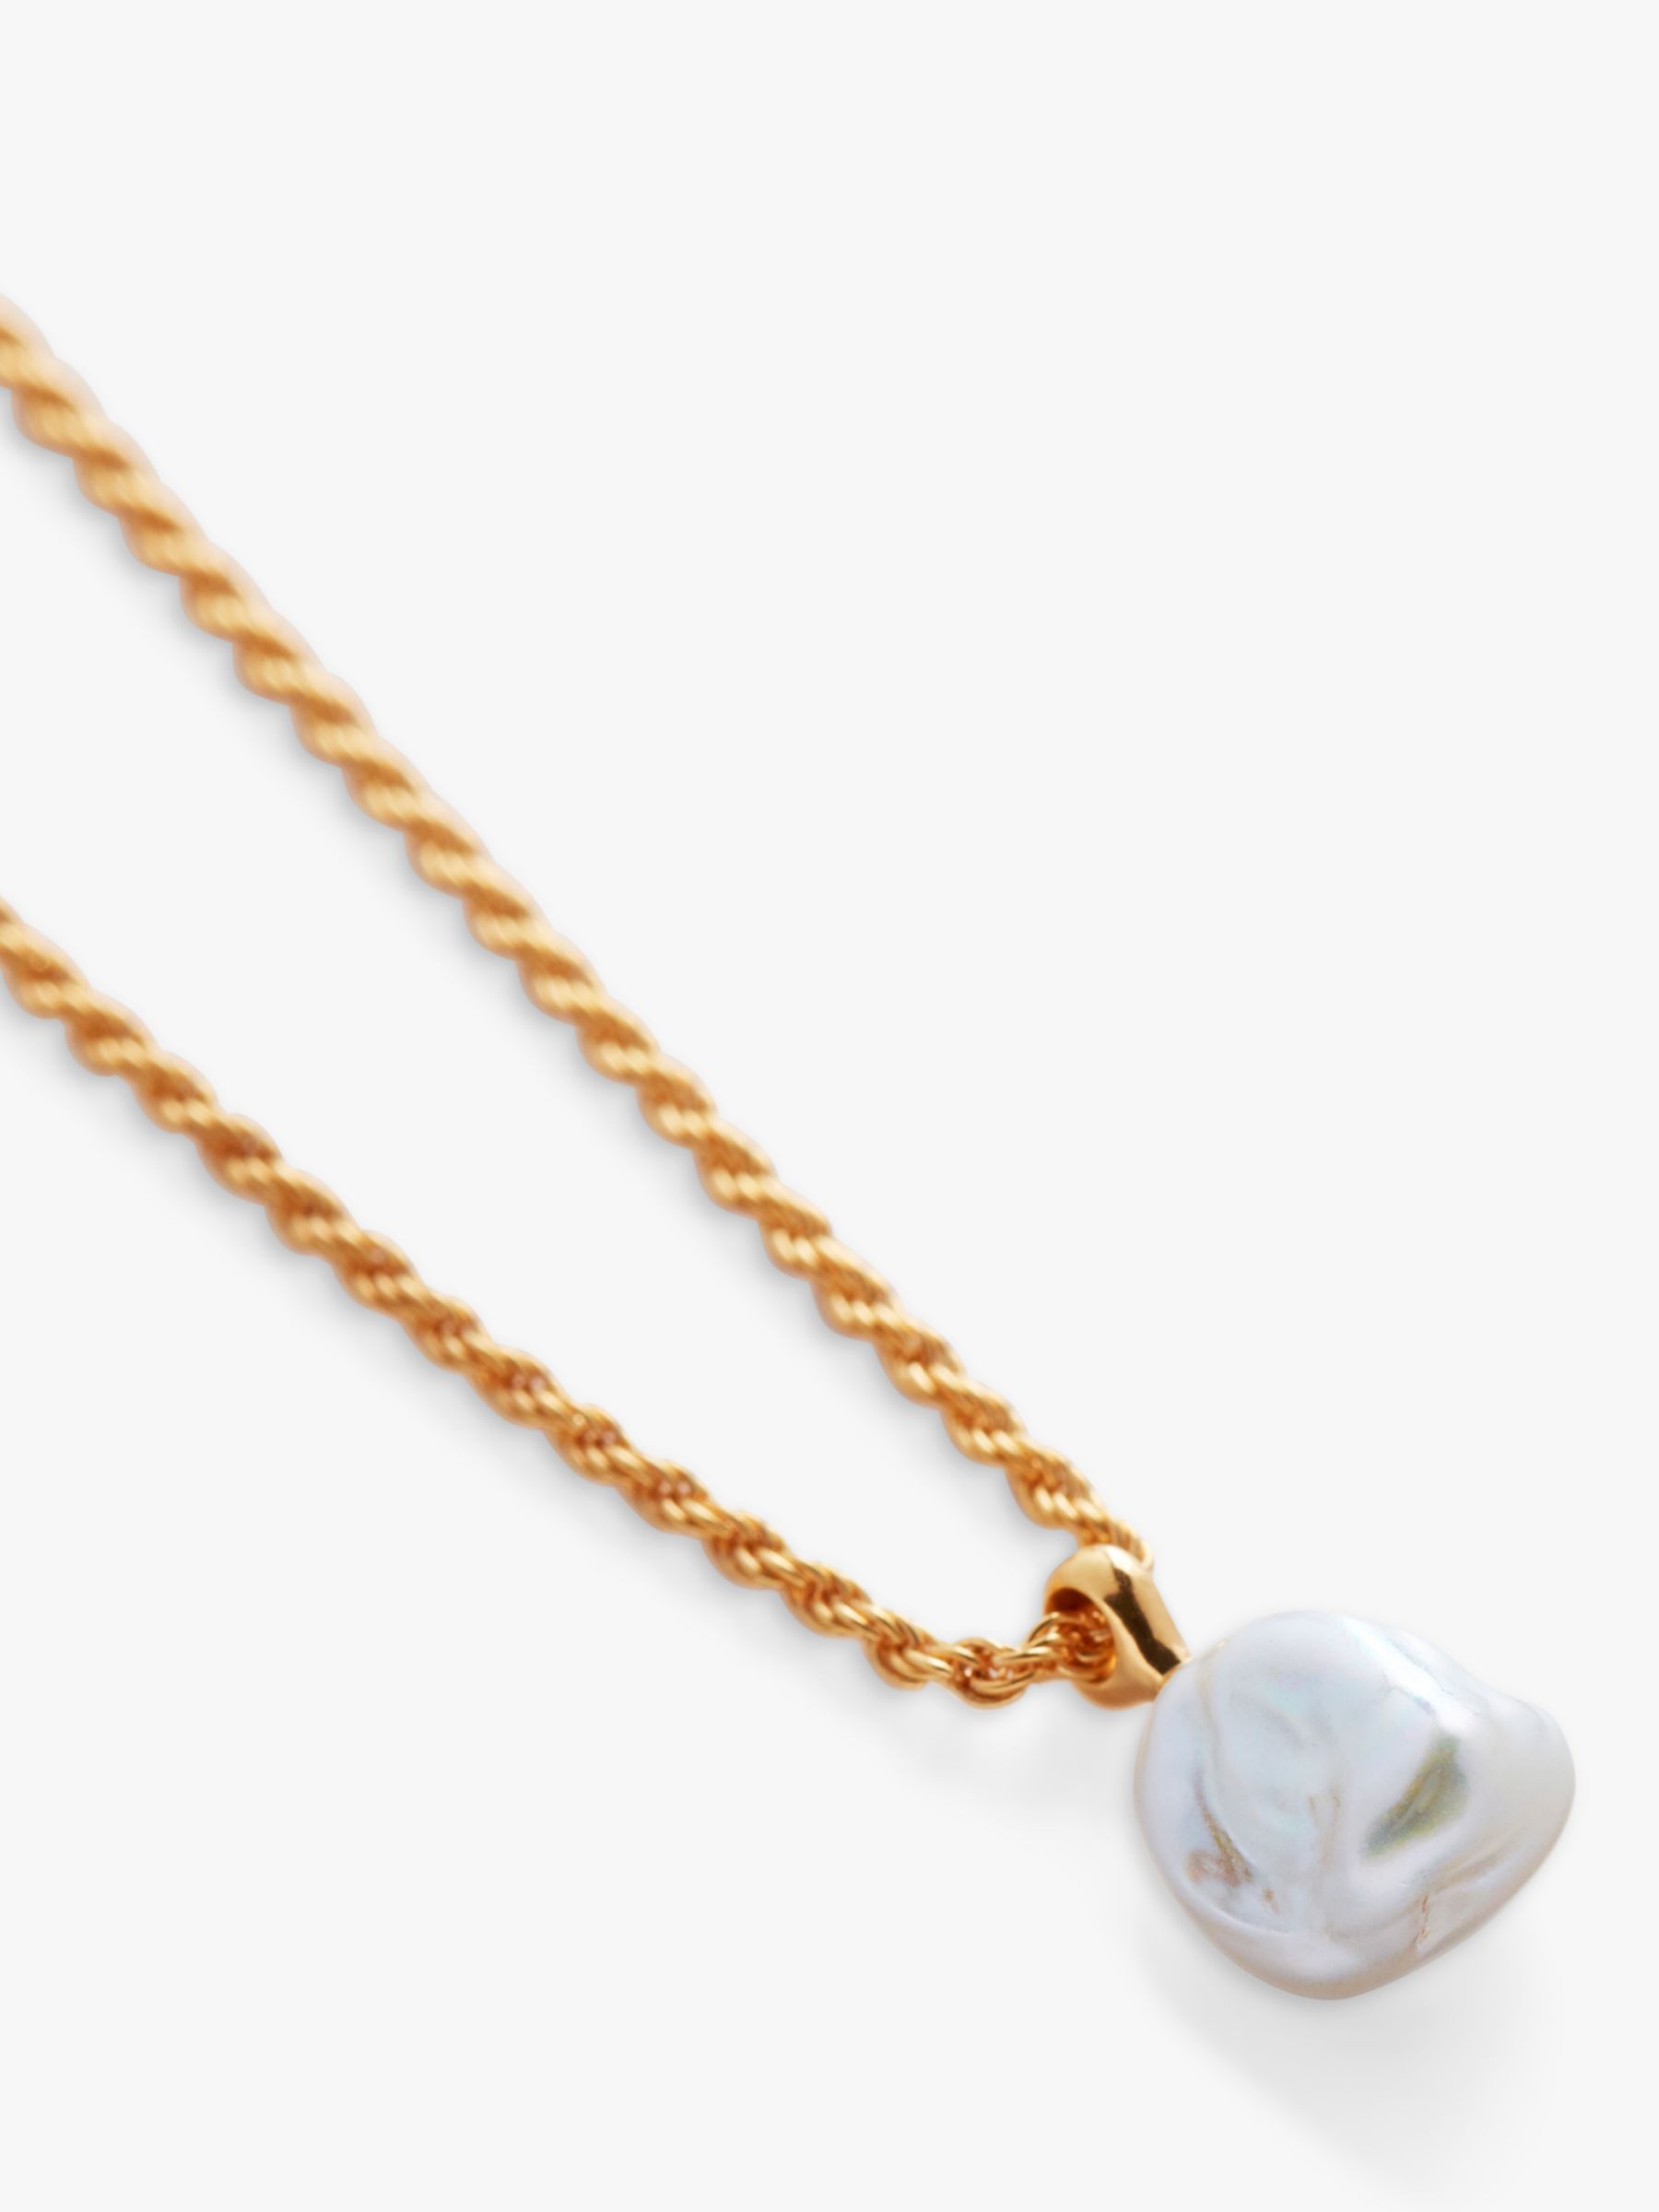 Buy Monica Vinader Nura Tiny Keshi Pearl Chain Necklace Online at johnlewis.com